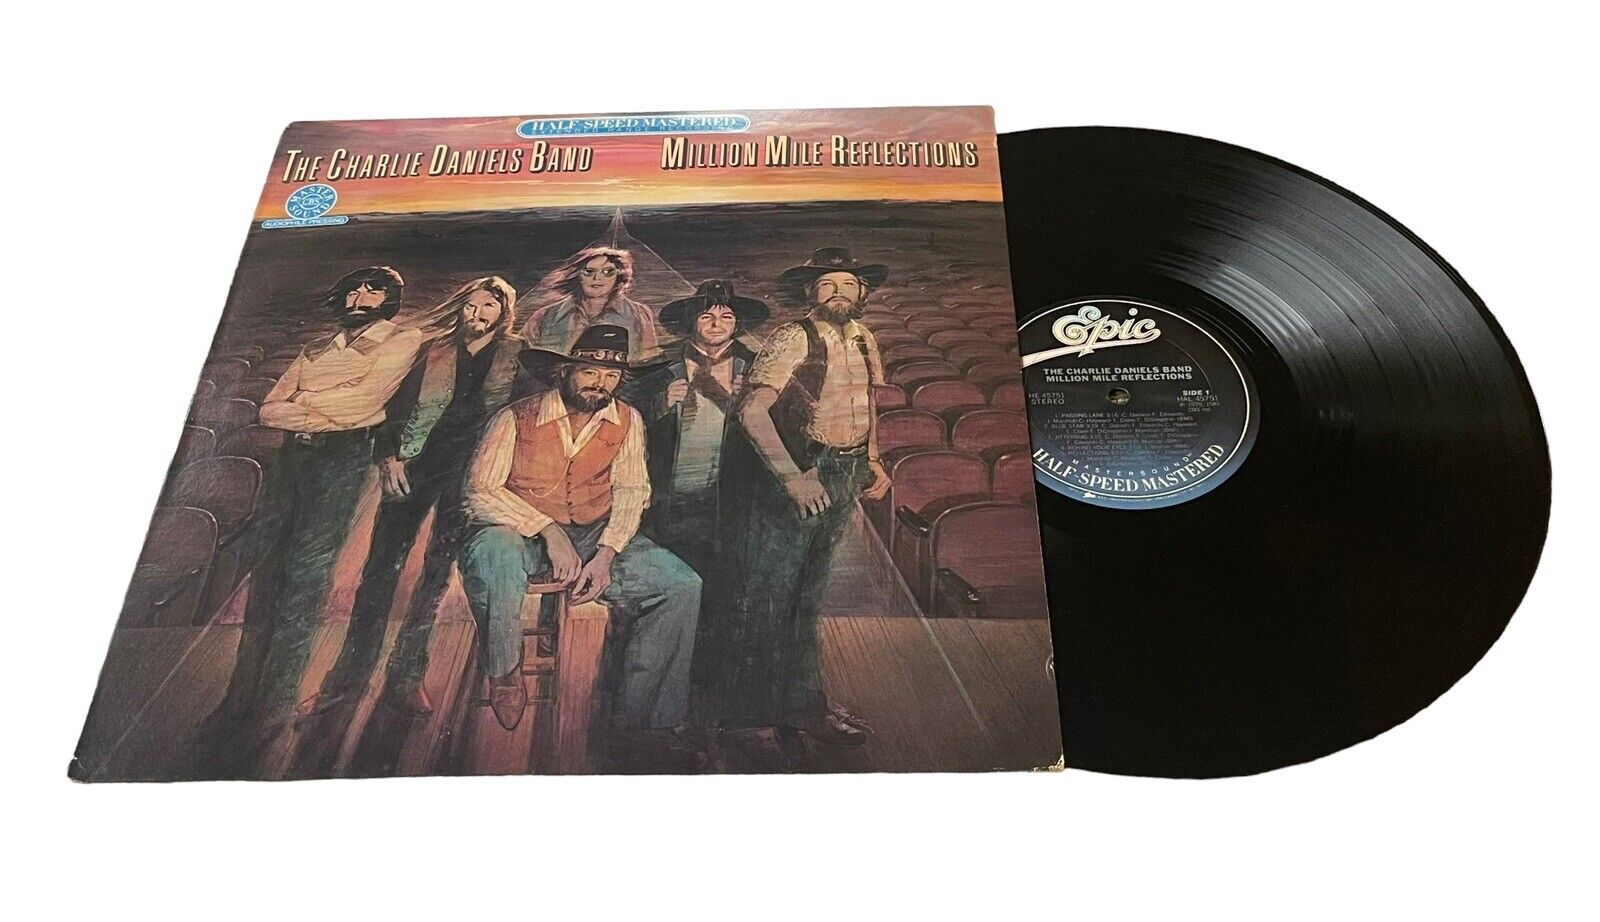 The Charlie Daniels Band - Million Mile Reflections - Half-Speed Mastered Vinyl